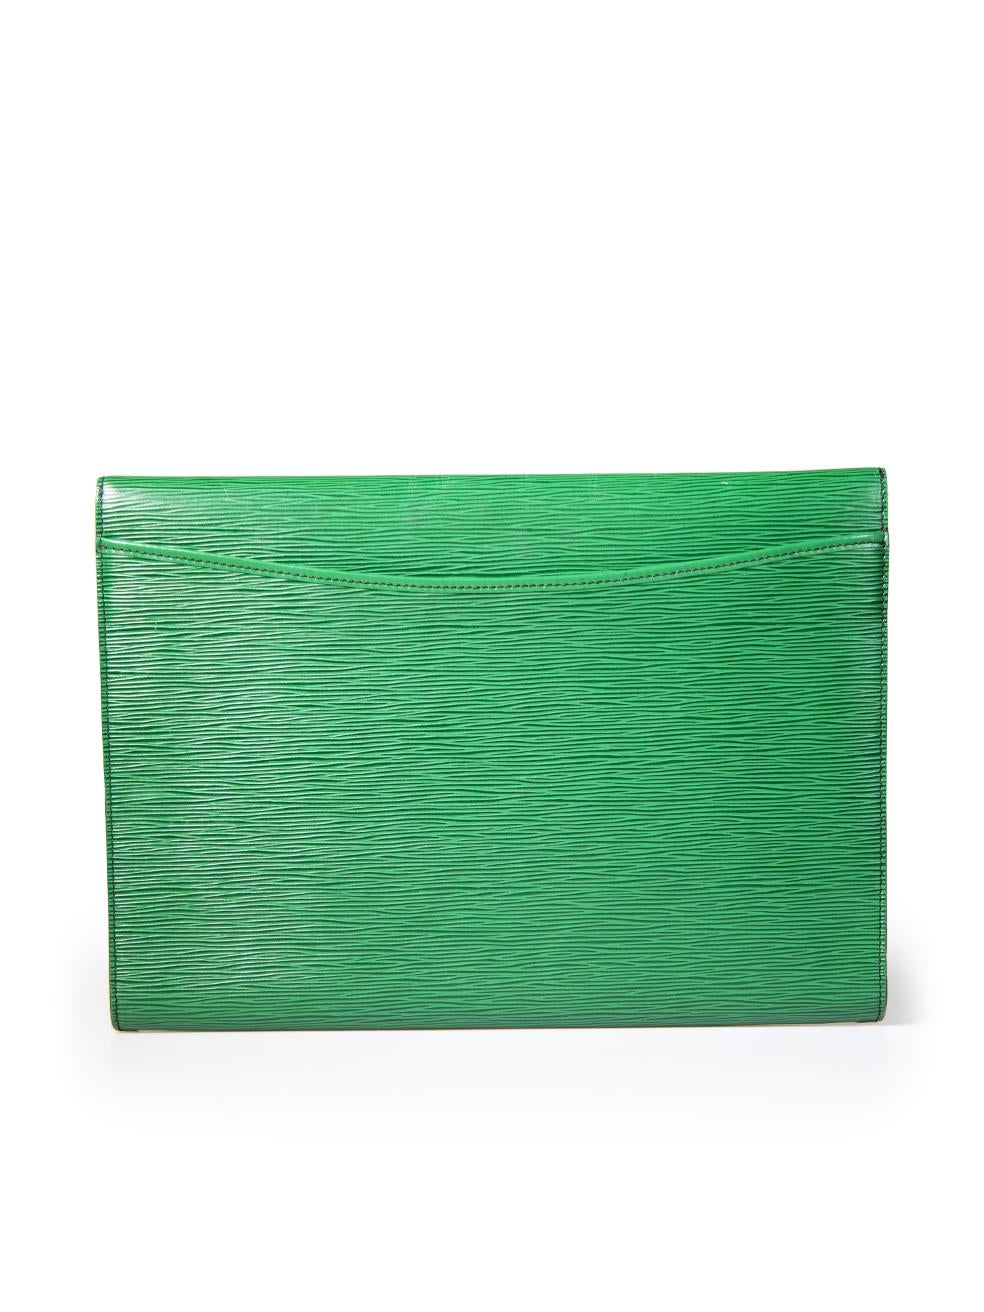 Louis Vuitton 1991 Green Epi Leather Large Clutch Bag In Good Condition For Sale In London, GB